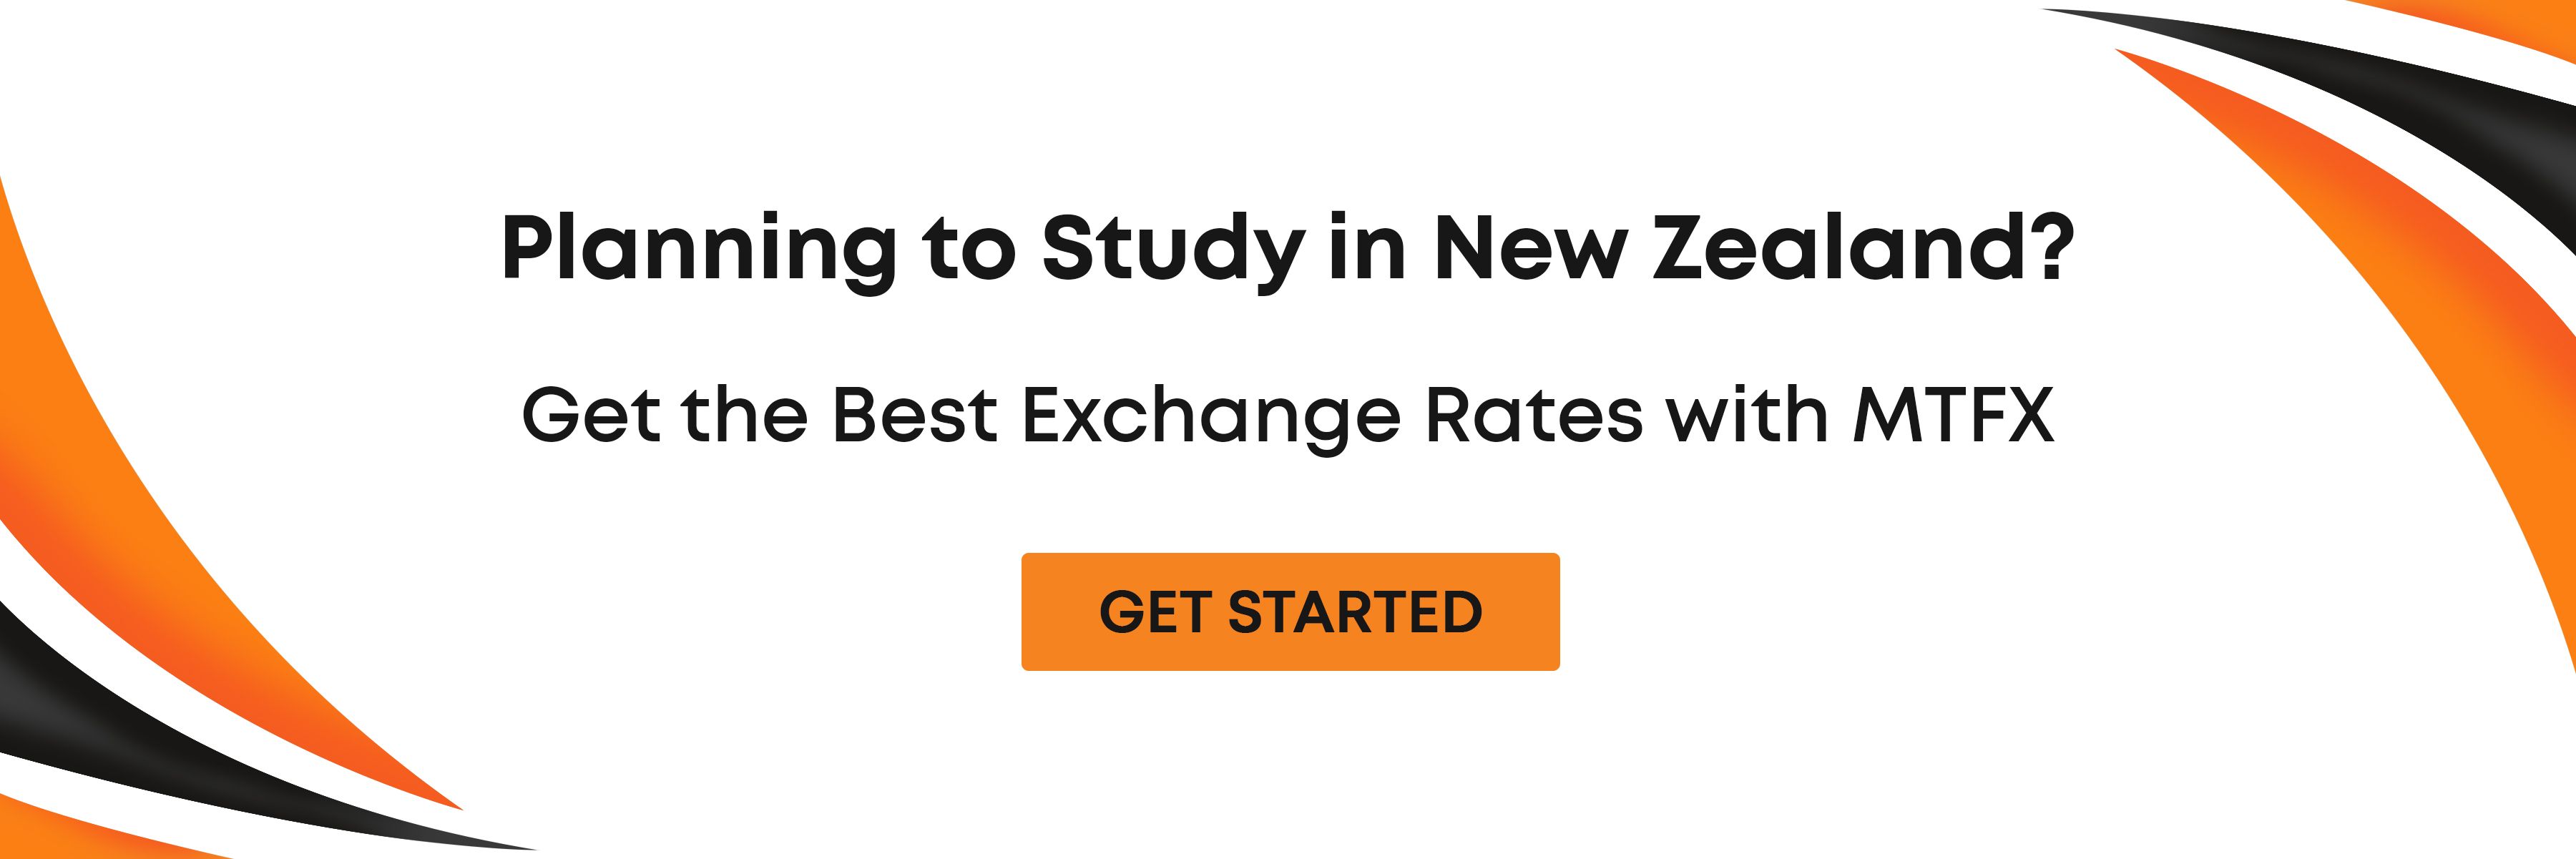 Planning to study in New Zealand?